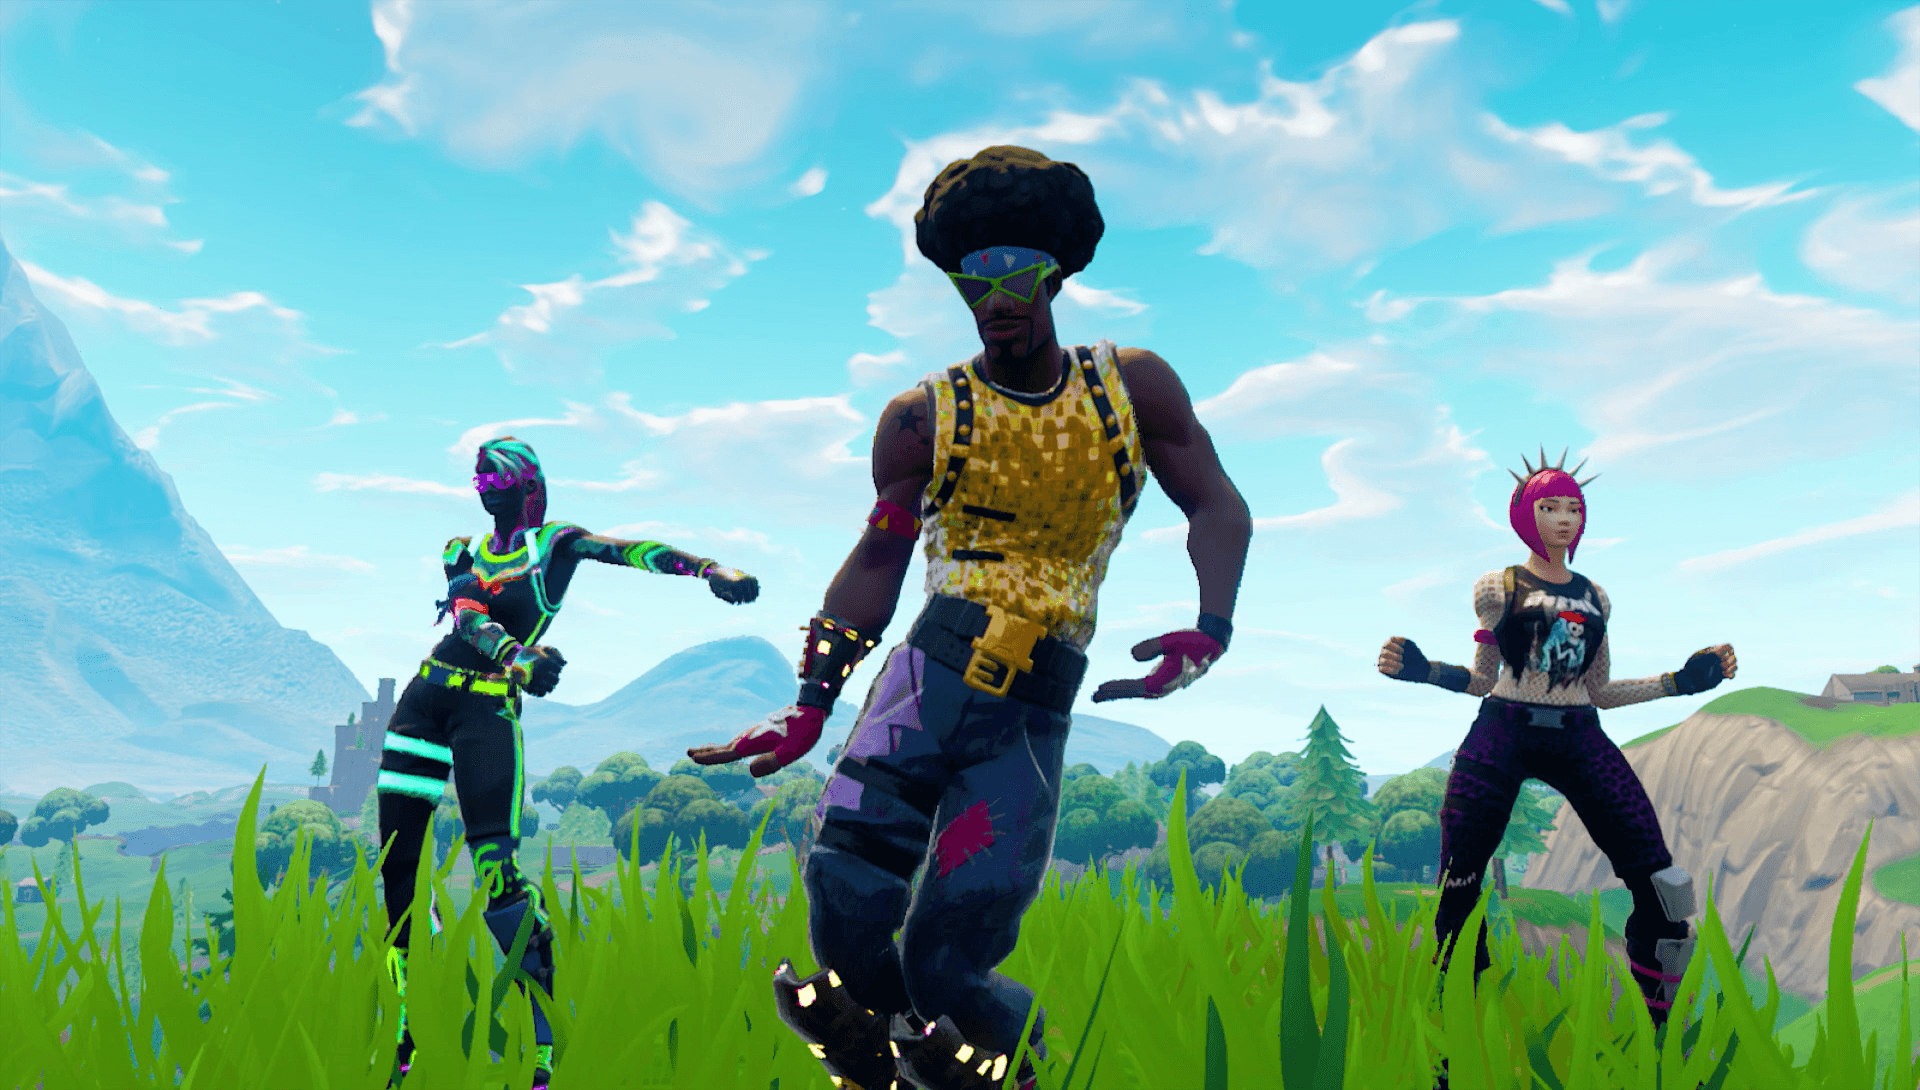 Fortnite Isn't on Xbox Cloud Gaming Because Epic Won't Allow It - IGN